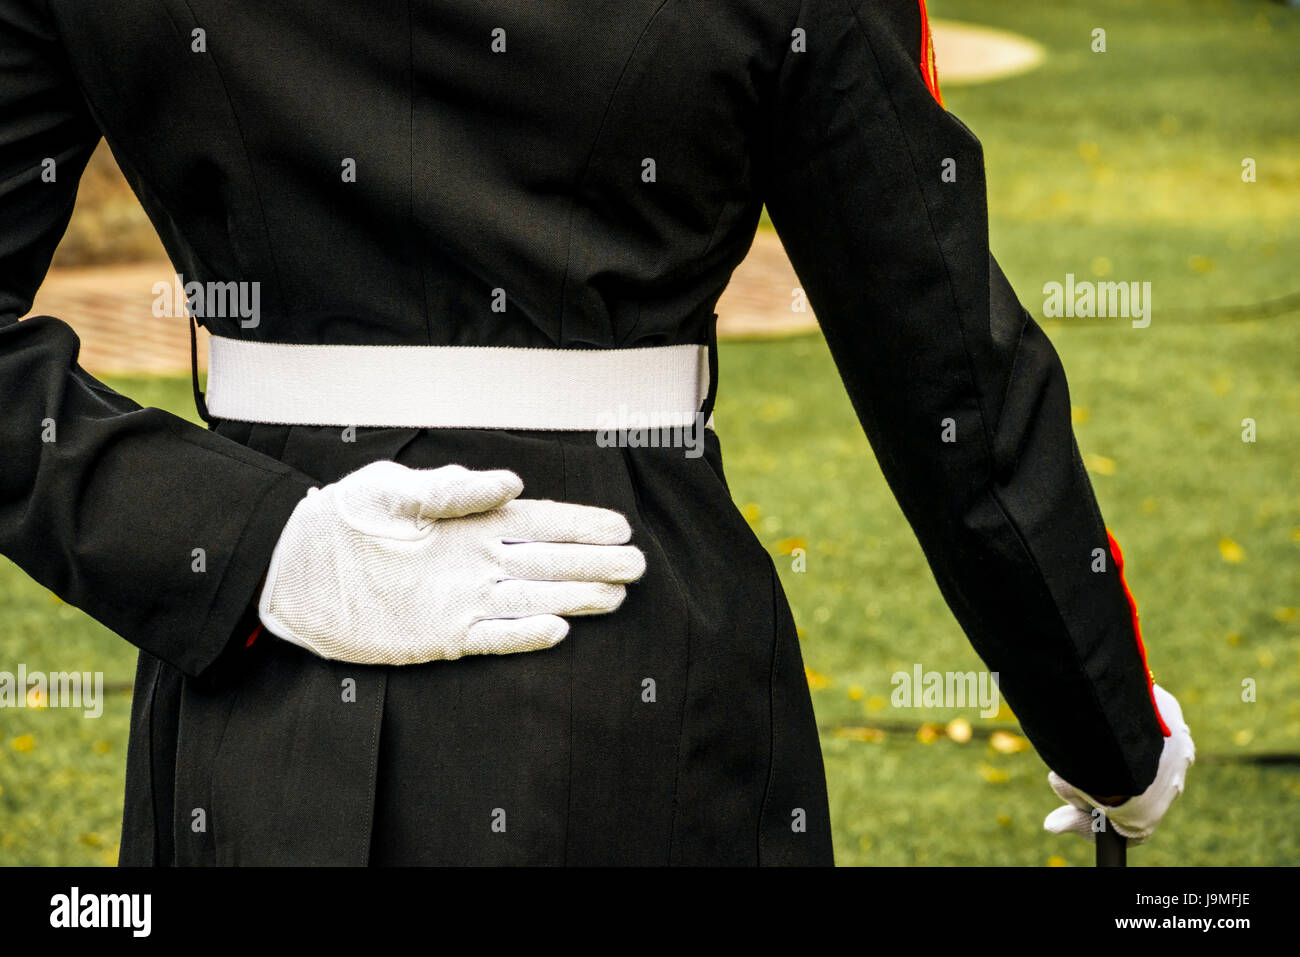 A US Marine at parade rest during a ceremony in southern California. Stock Photo